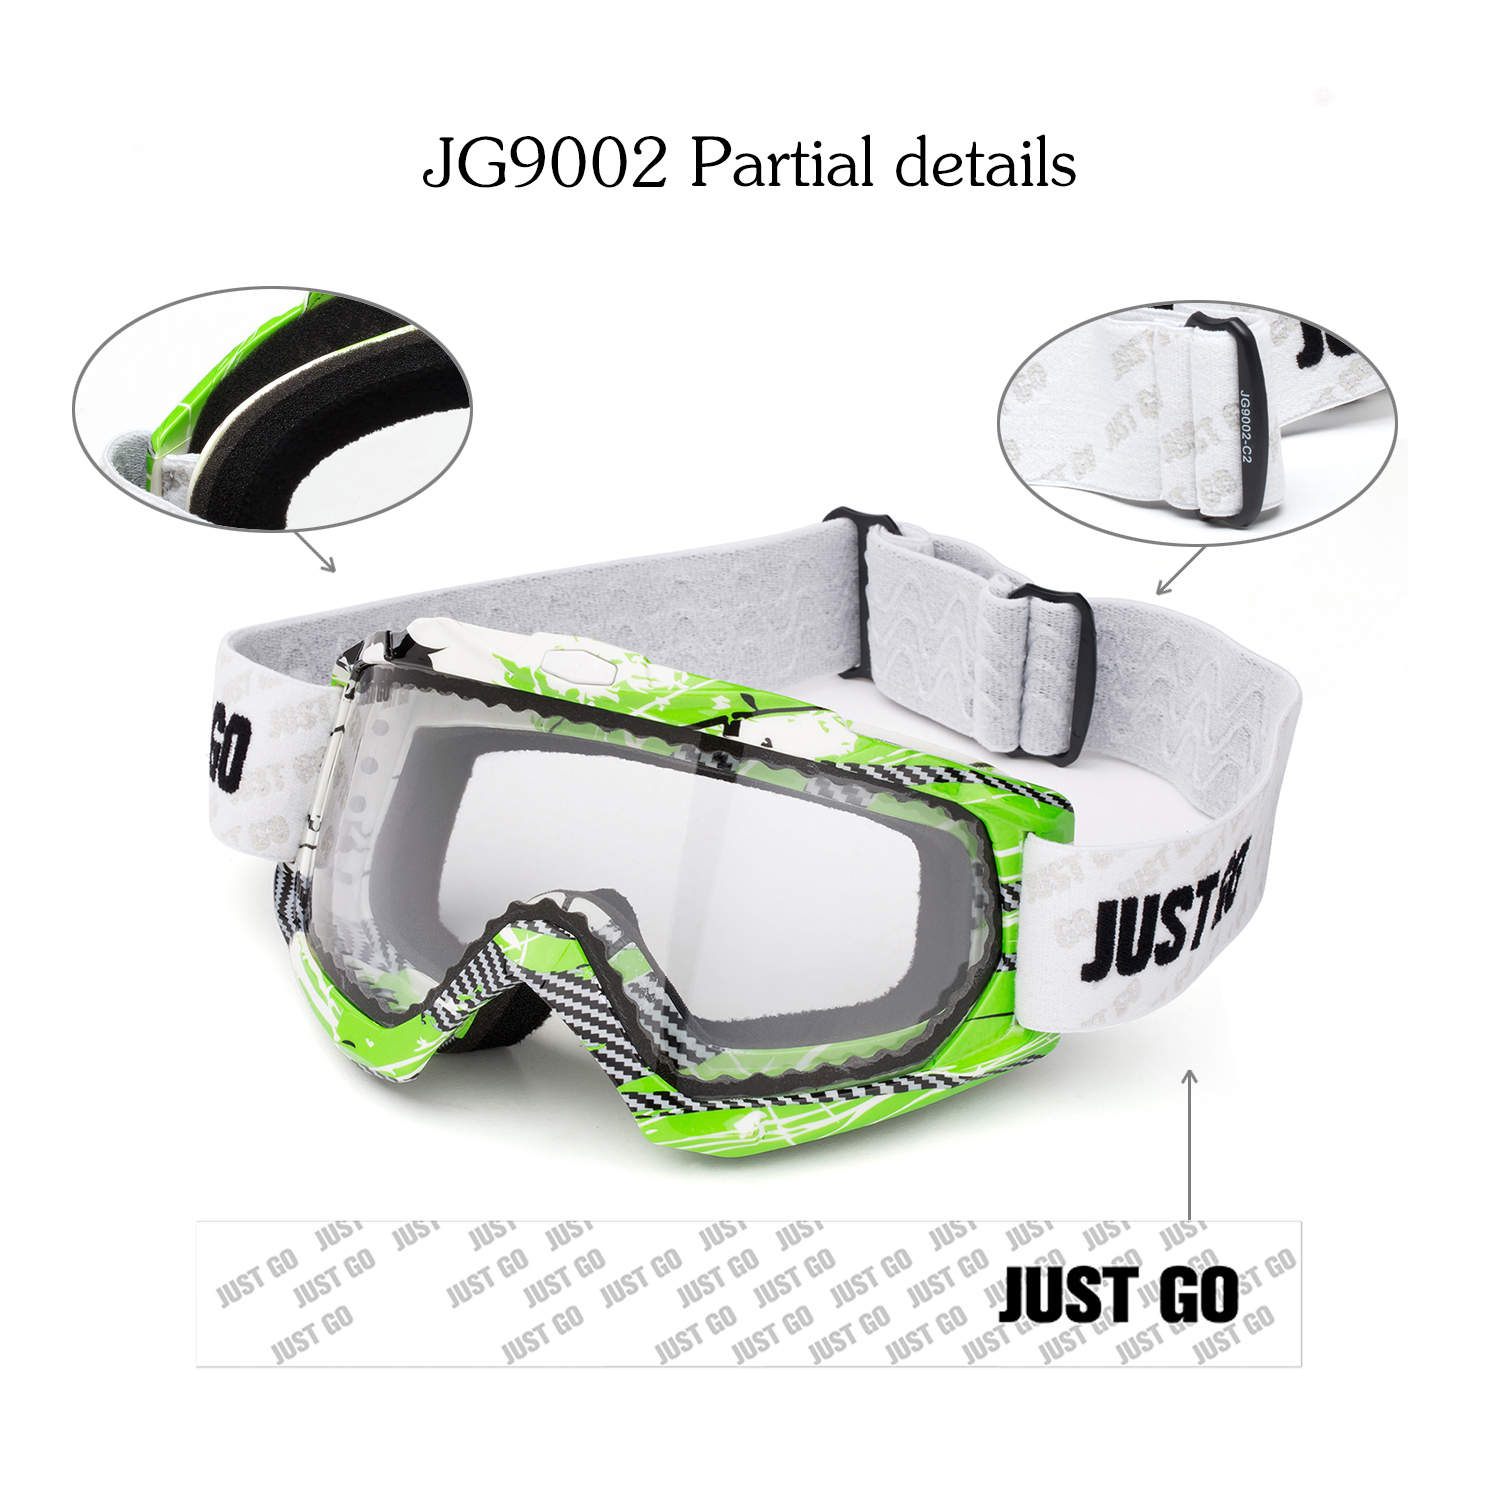 JUST GO Ski Goggles for Skiing Motorcycling and Winter Sports Dual-Layer Anti-Fog 100% UV Protection lens Snowboard Goggles fit Men, Women and Youth, Green and White Frame/ Clear Lens (VLT 81.2%) - image 5 of 9